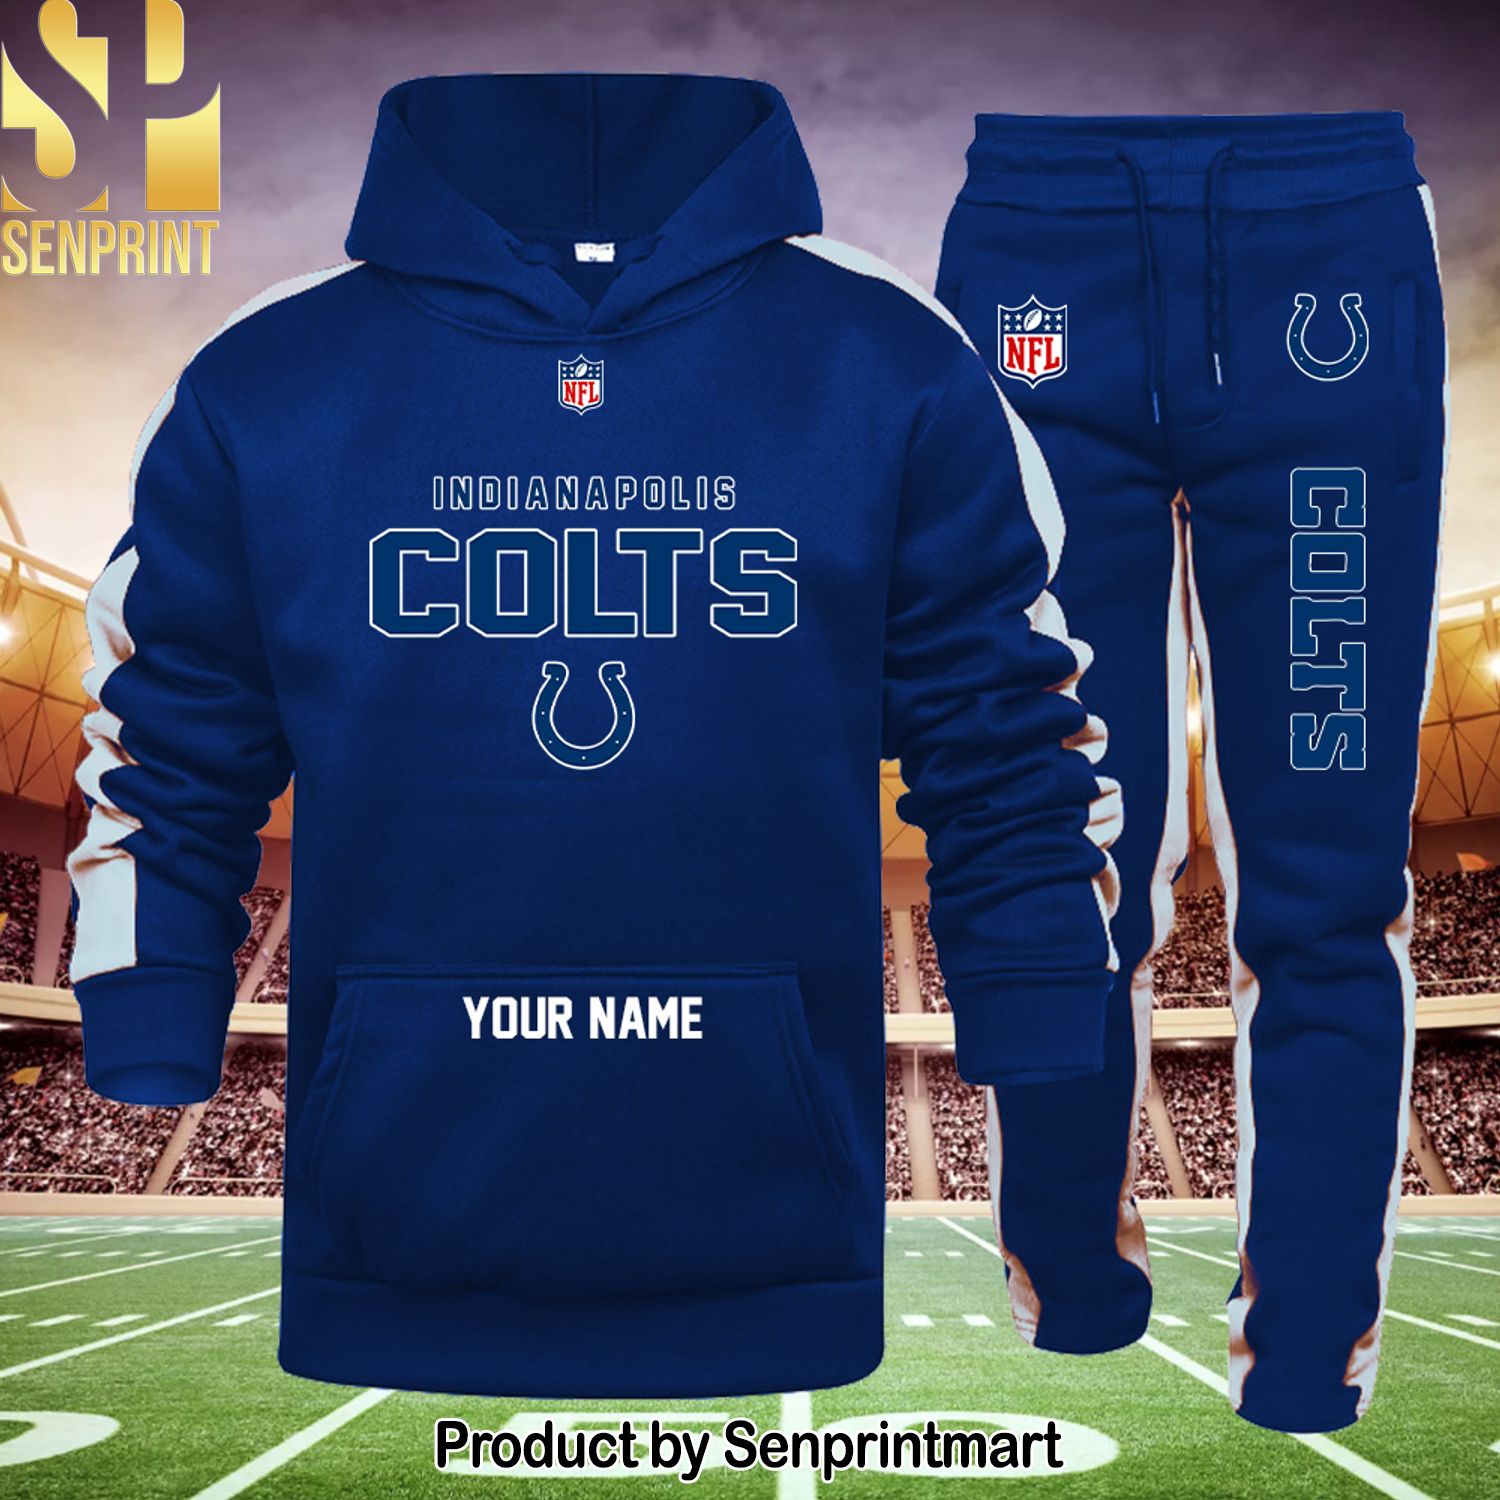 NFL Indianapolis Colts Awesome Outfit Shirt and Sweatpants